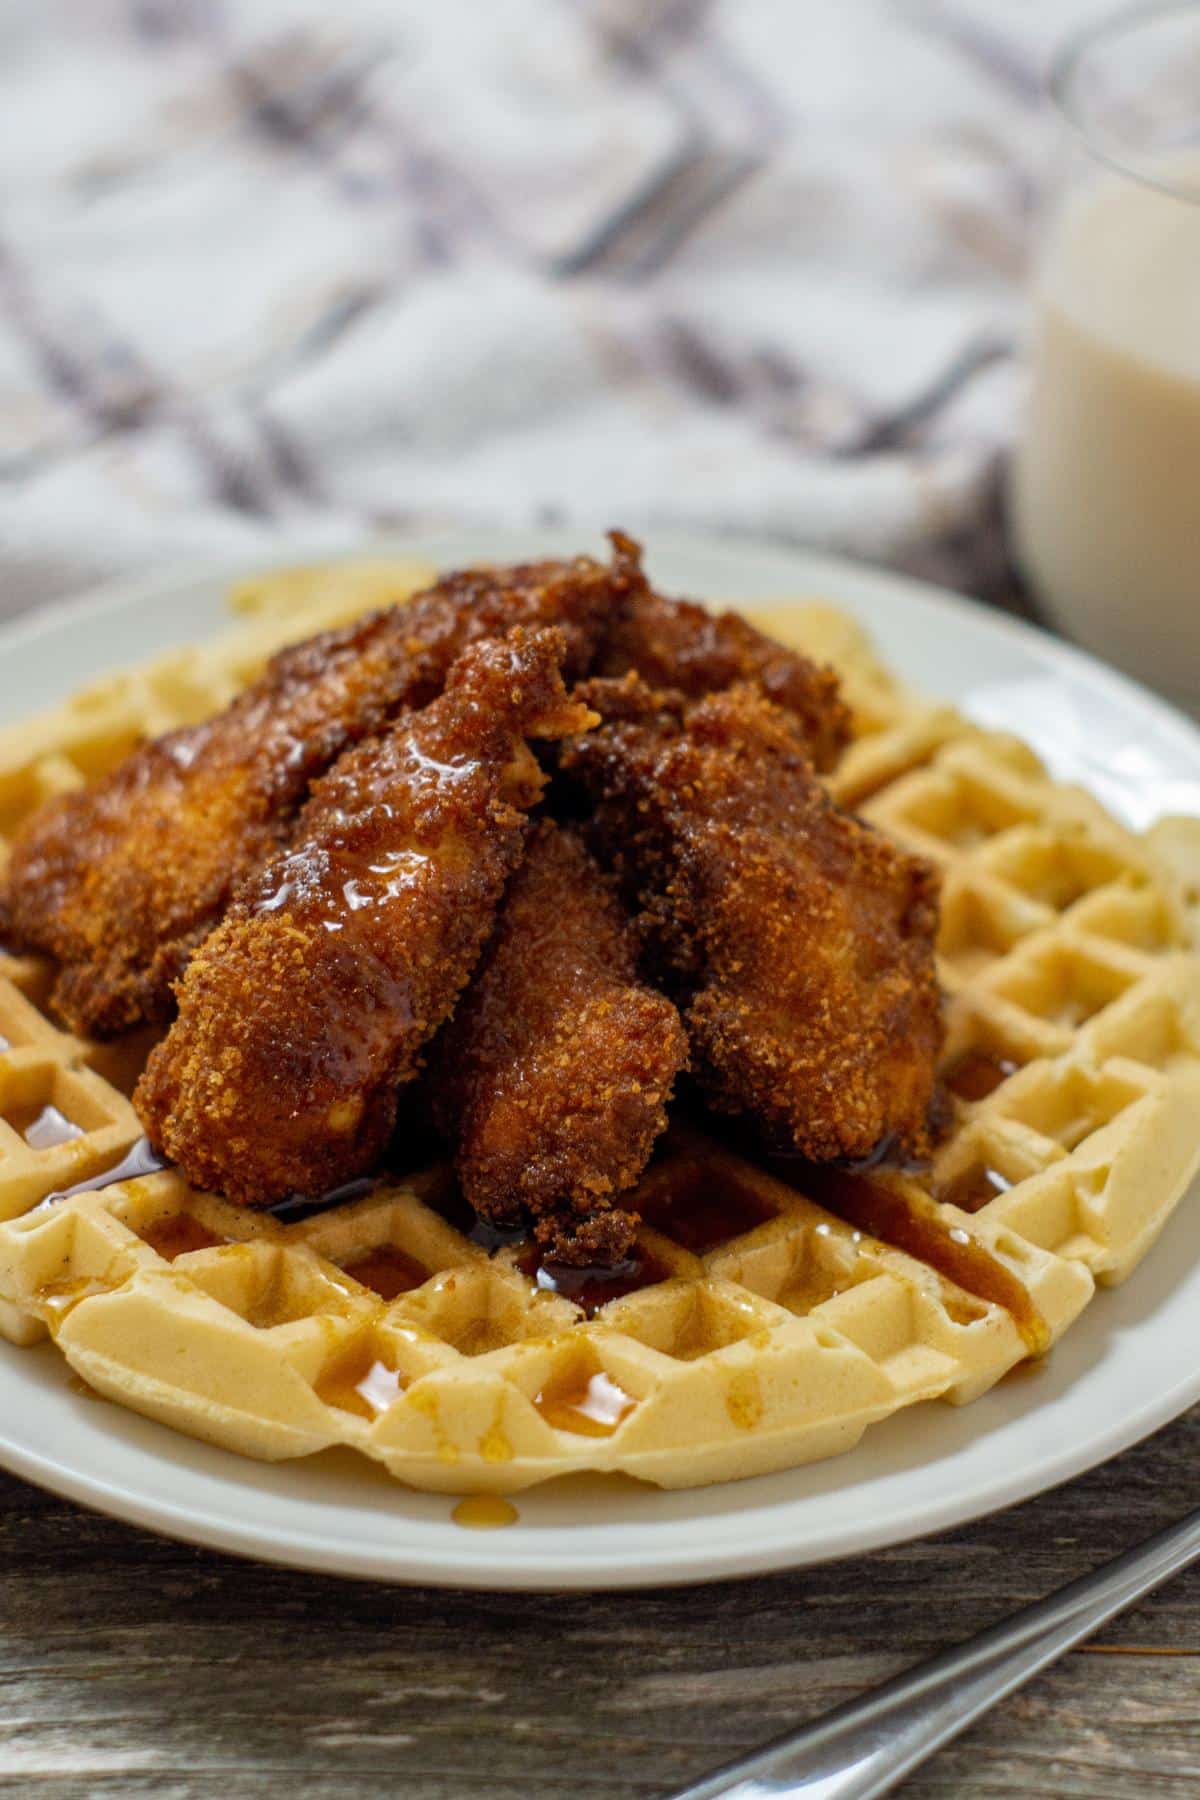 Southern Chicken and Waffles with maple syrup on a serving plate next to a glass of milk.